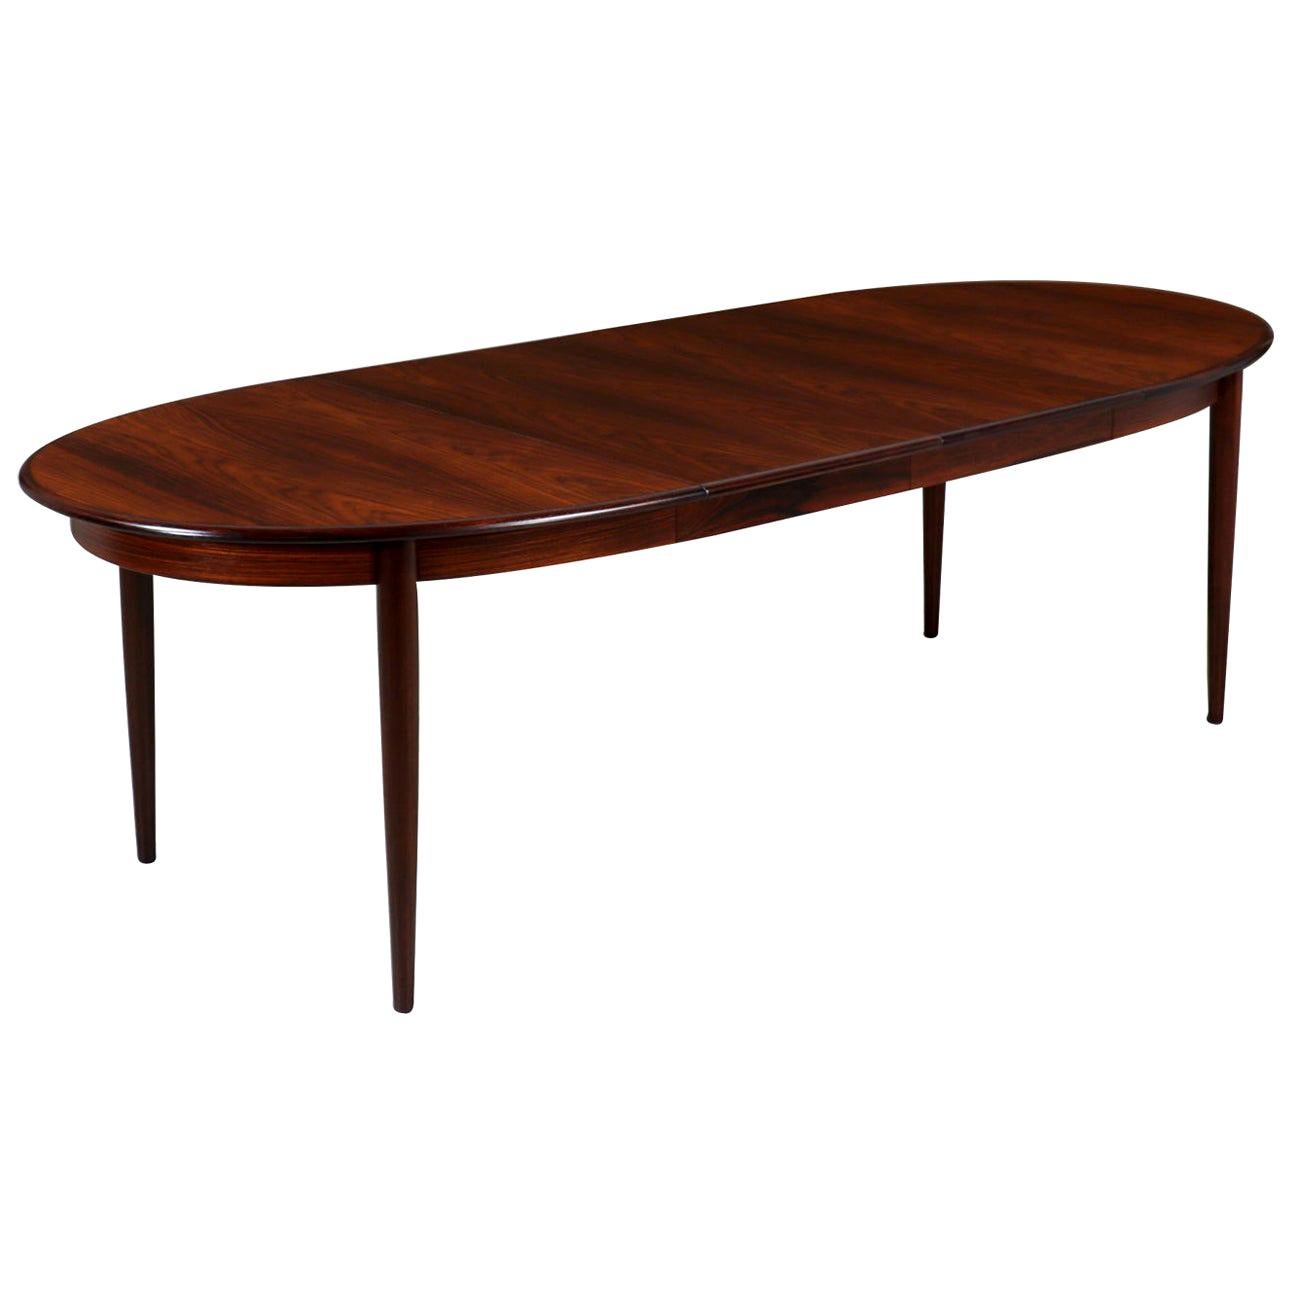 Danish Modern Expanding Rosewood Dining Table by Gudme Møbelfabrik